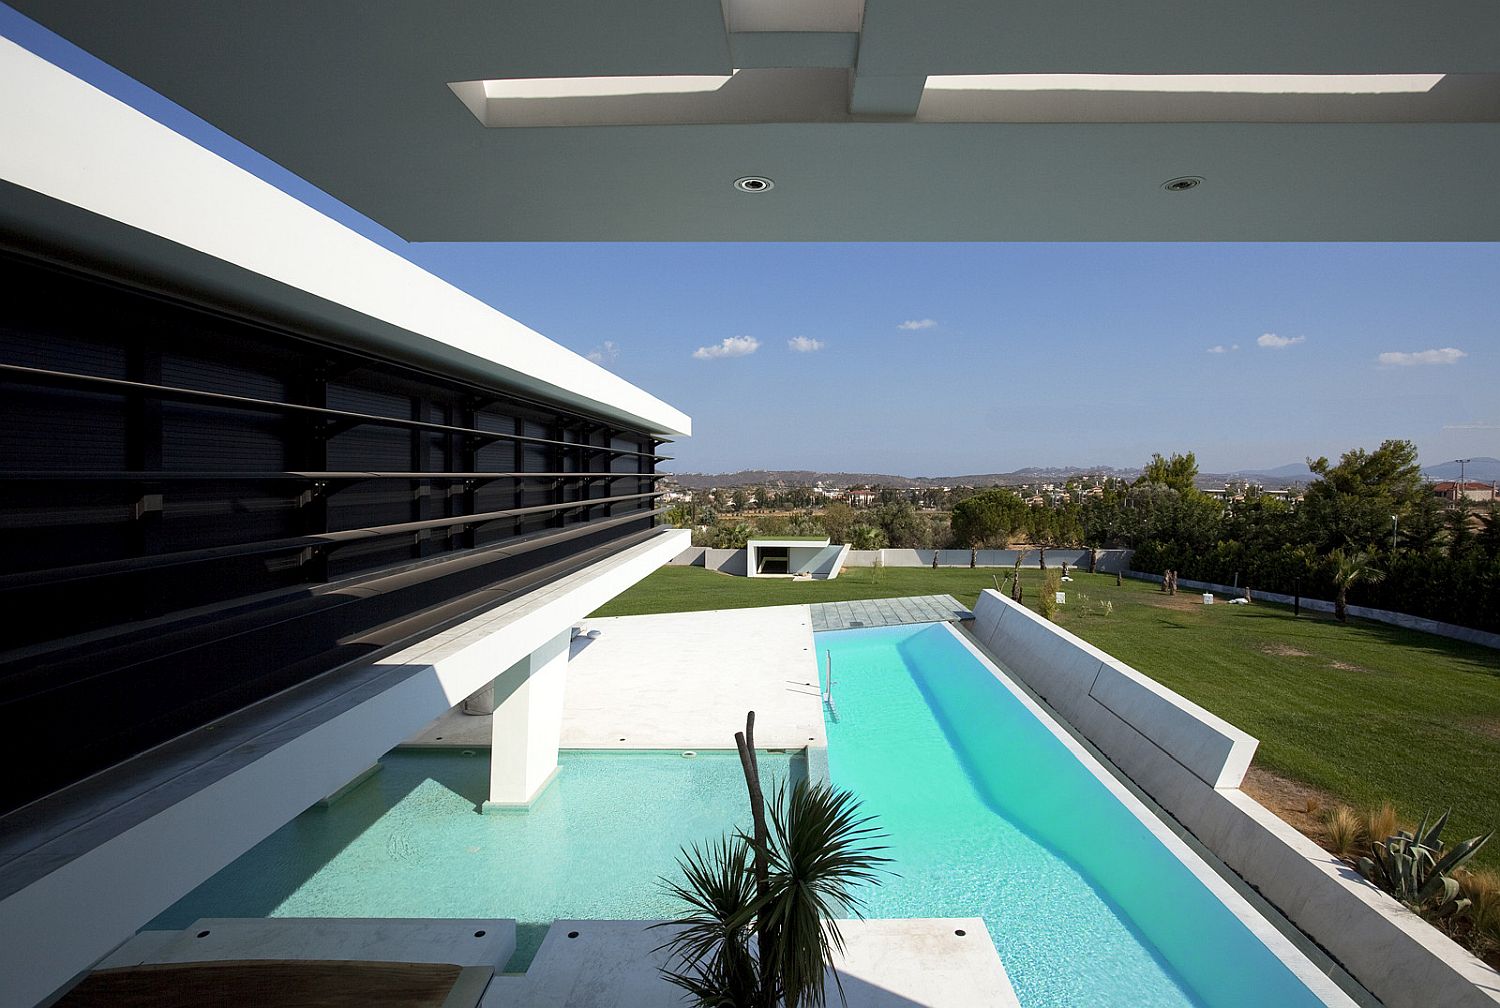 Home-hovers-above-the-pool-area-to-offer-a-stunning-visual